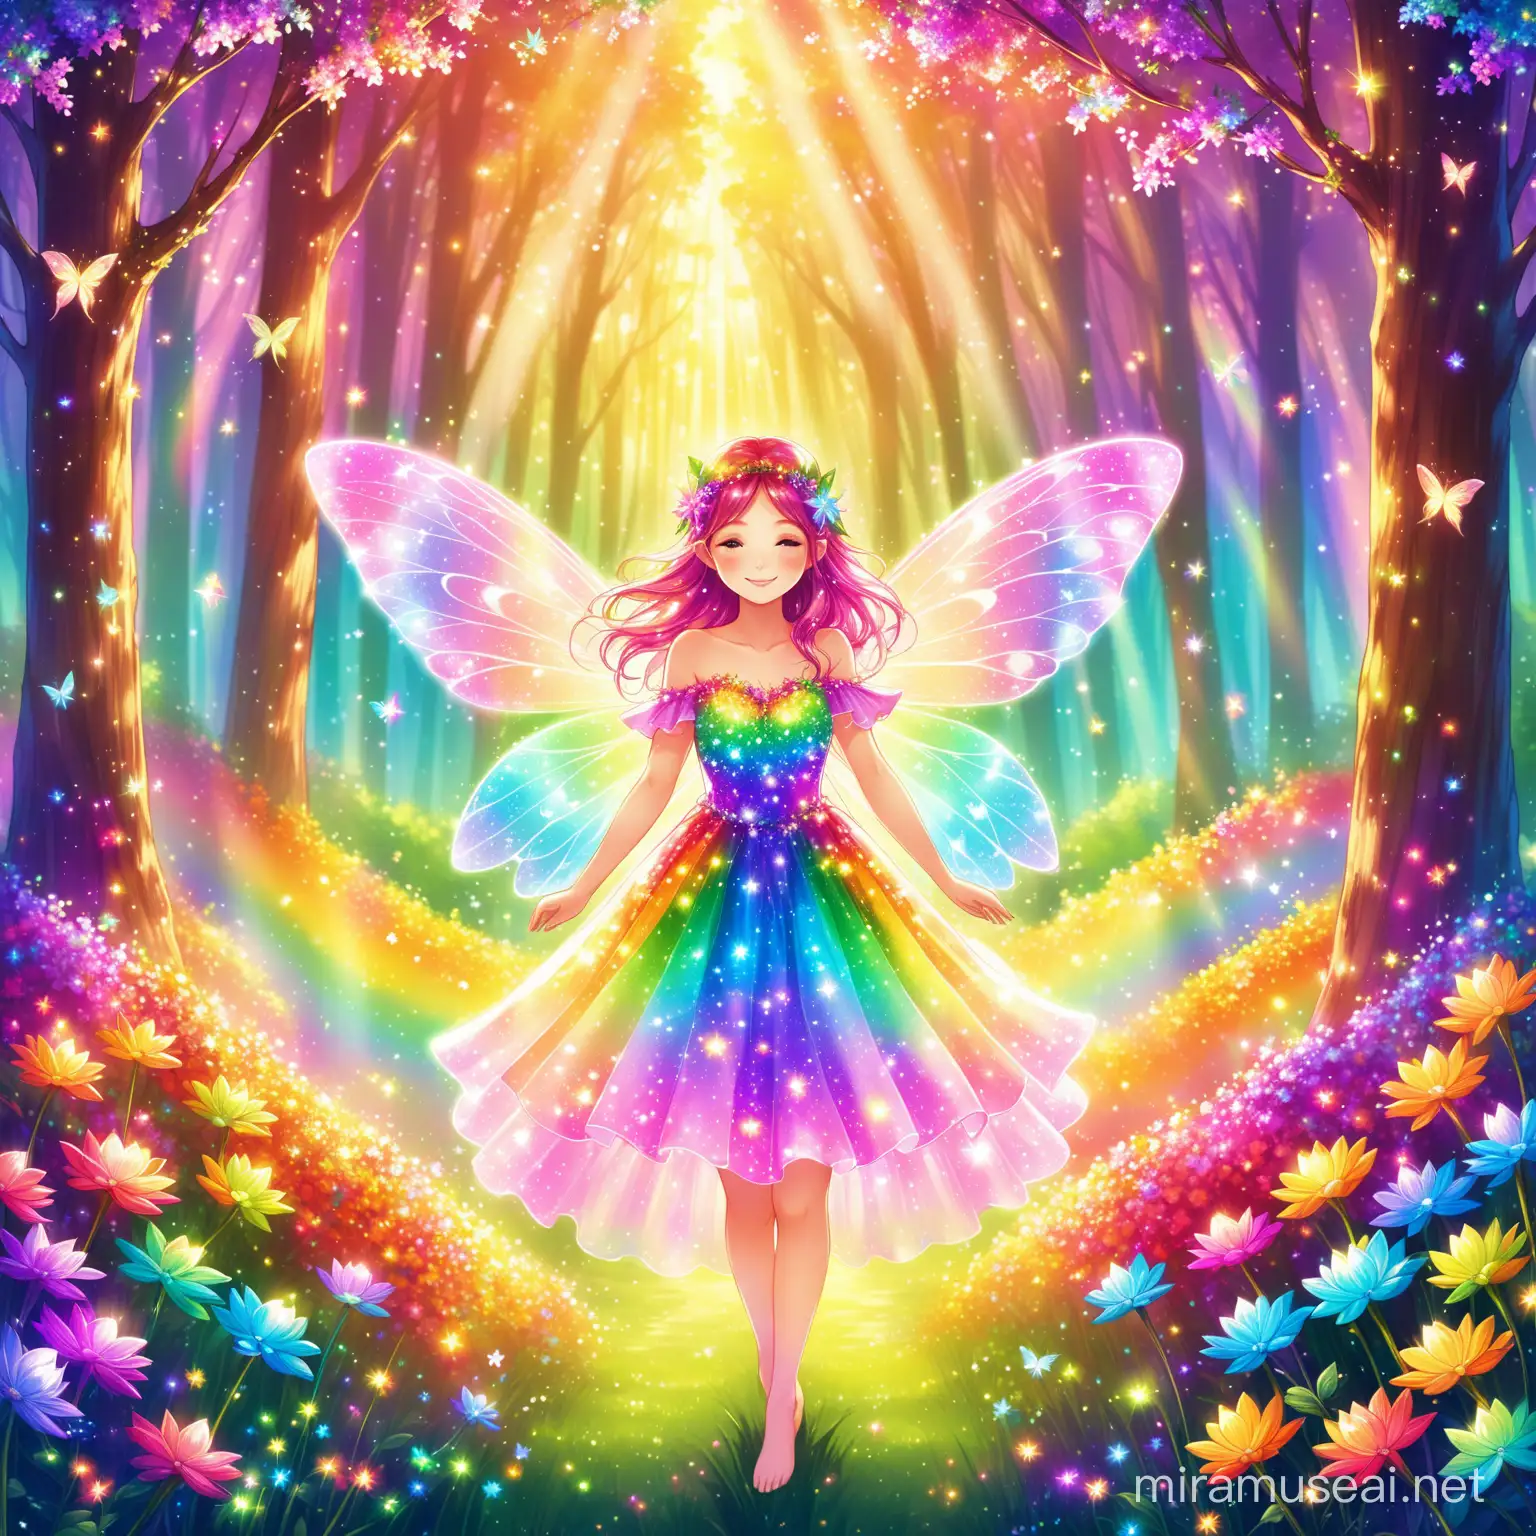 fairy girl with flowers in the colors of the rainbow. In a fairy forest. Sparkling light